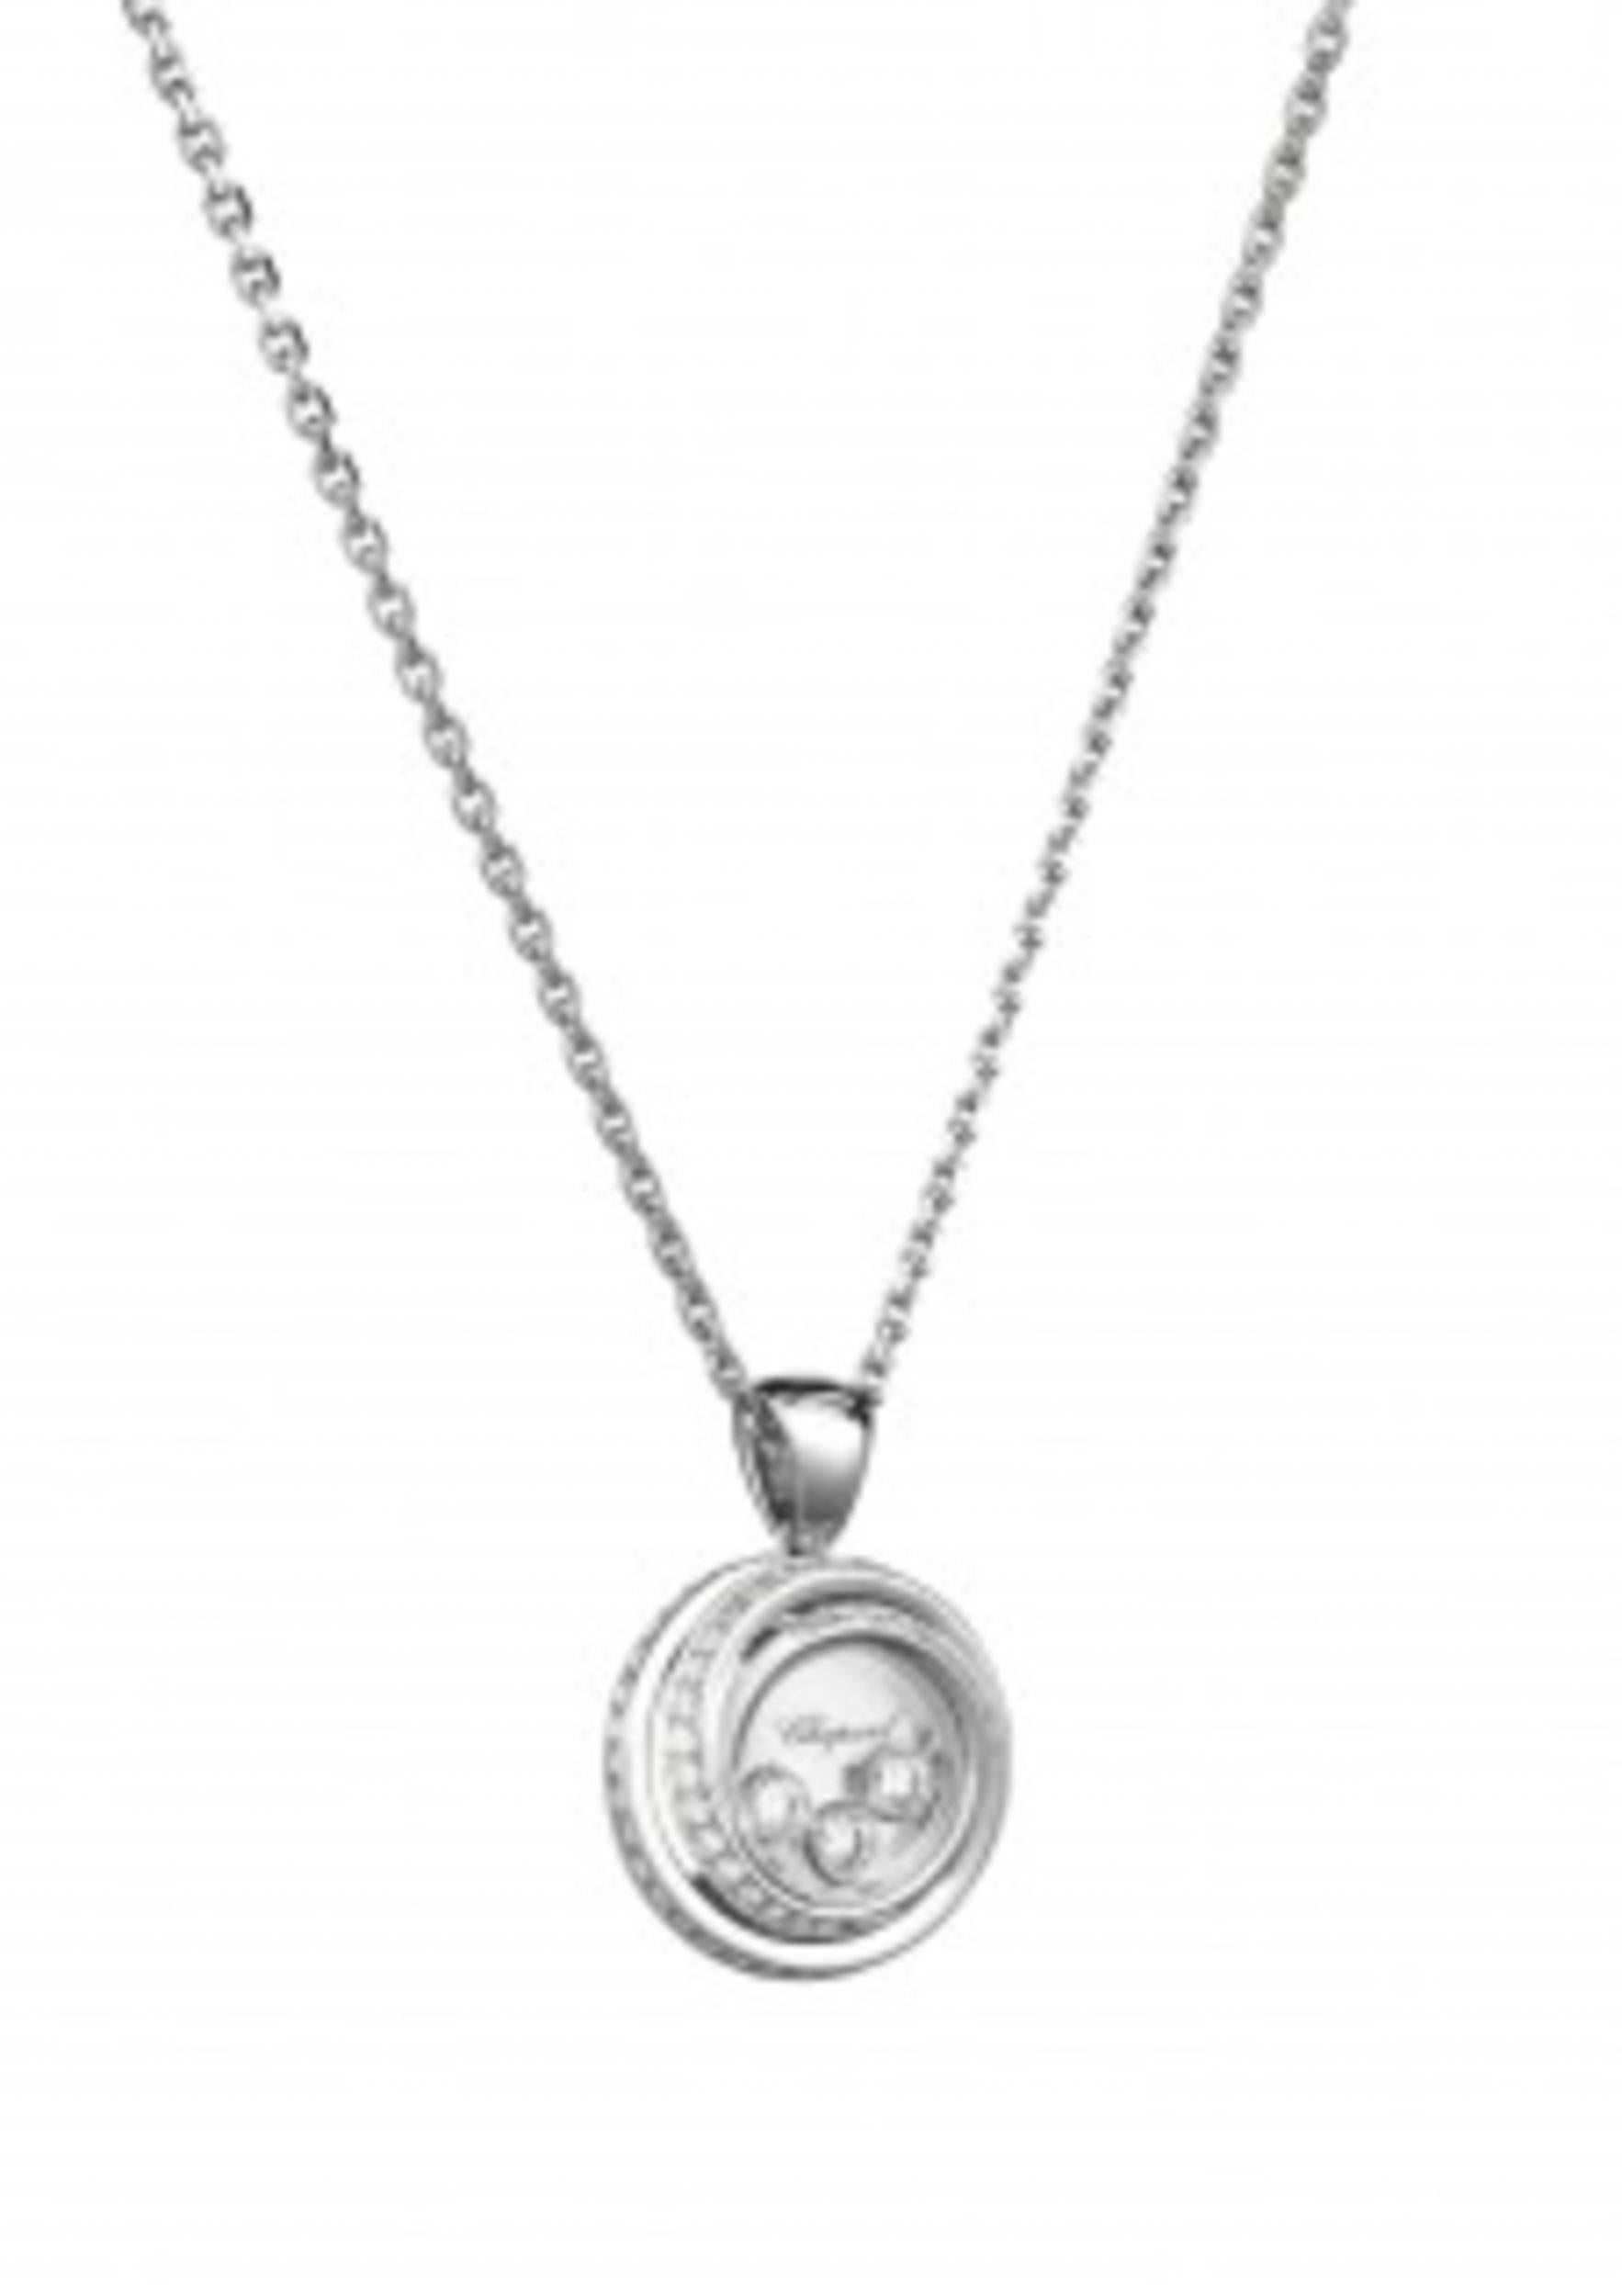 Stylish... this Happy Emotion Pendant set with diamonds in 18 karat white gold, the spiral of precious metal becomes a radiant nest of light, encircling 3 moving diamonds between their sapphire crystals as they perform the most beautiful and